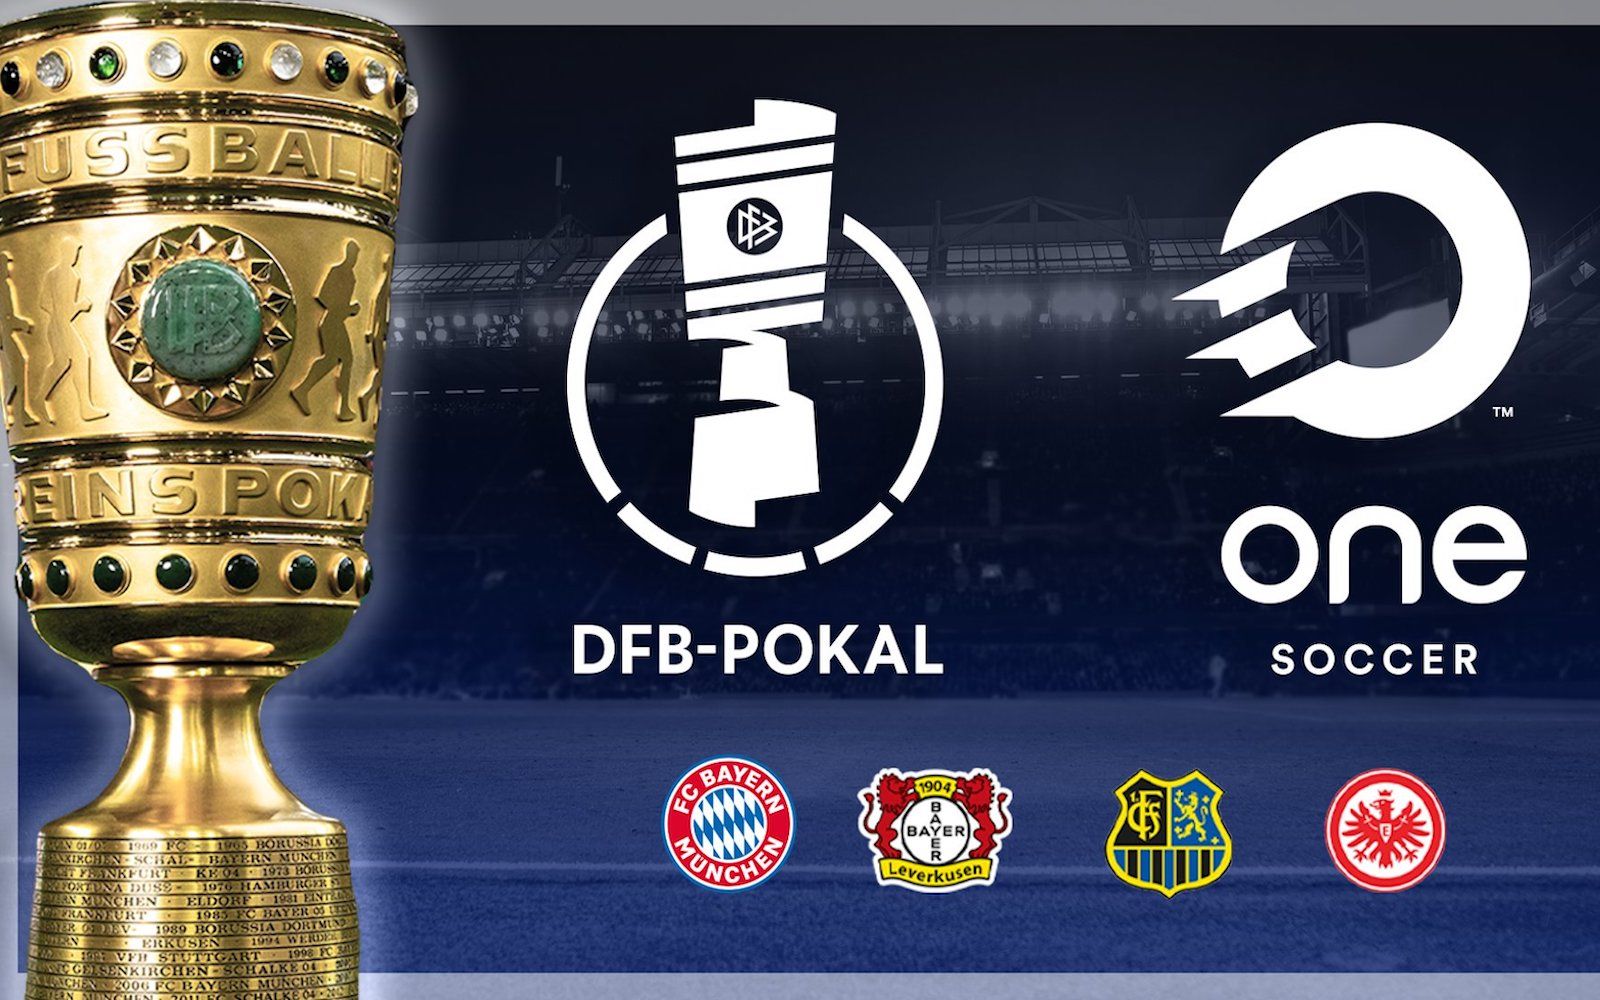 Alphonso Davies And Bayern Munich In Dfb Pokal Semi Final Clash Live And Exclusive On Onesoccer